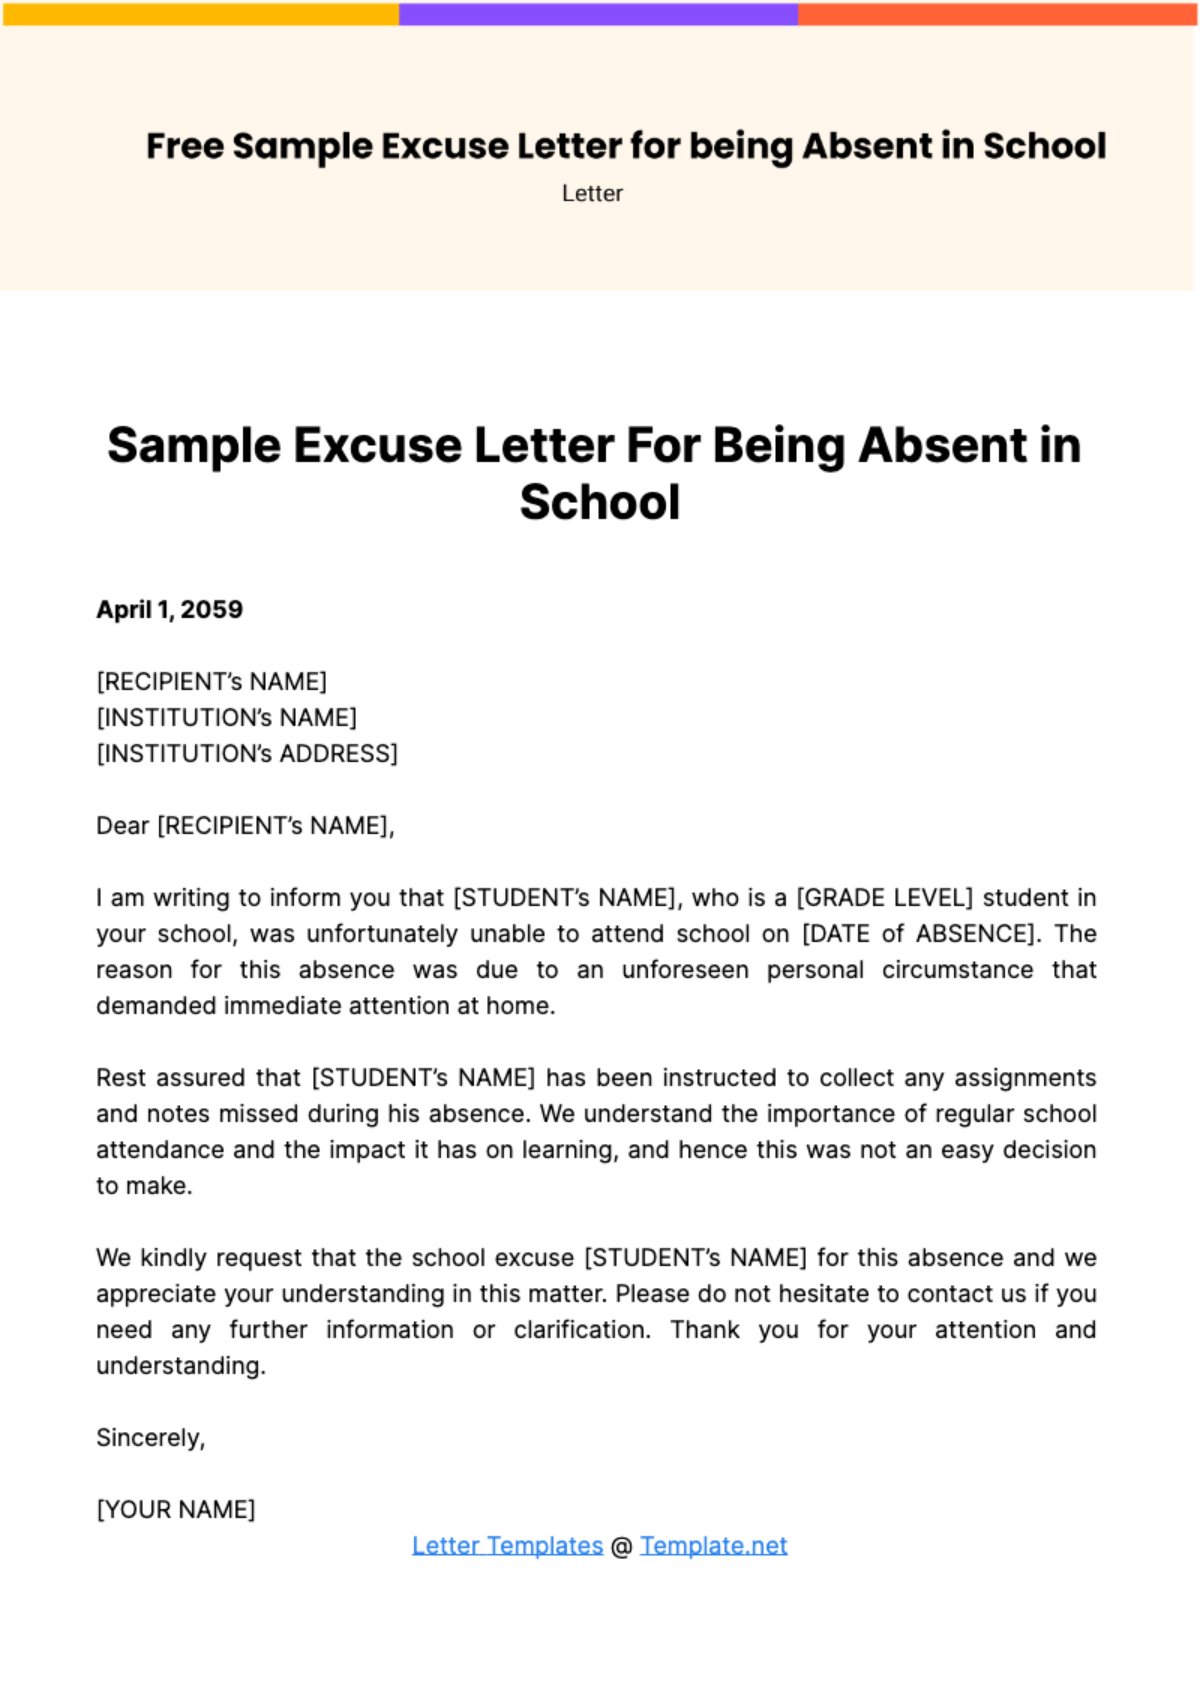 Free Sample Excuse Letter for being Absent in School Template